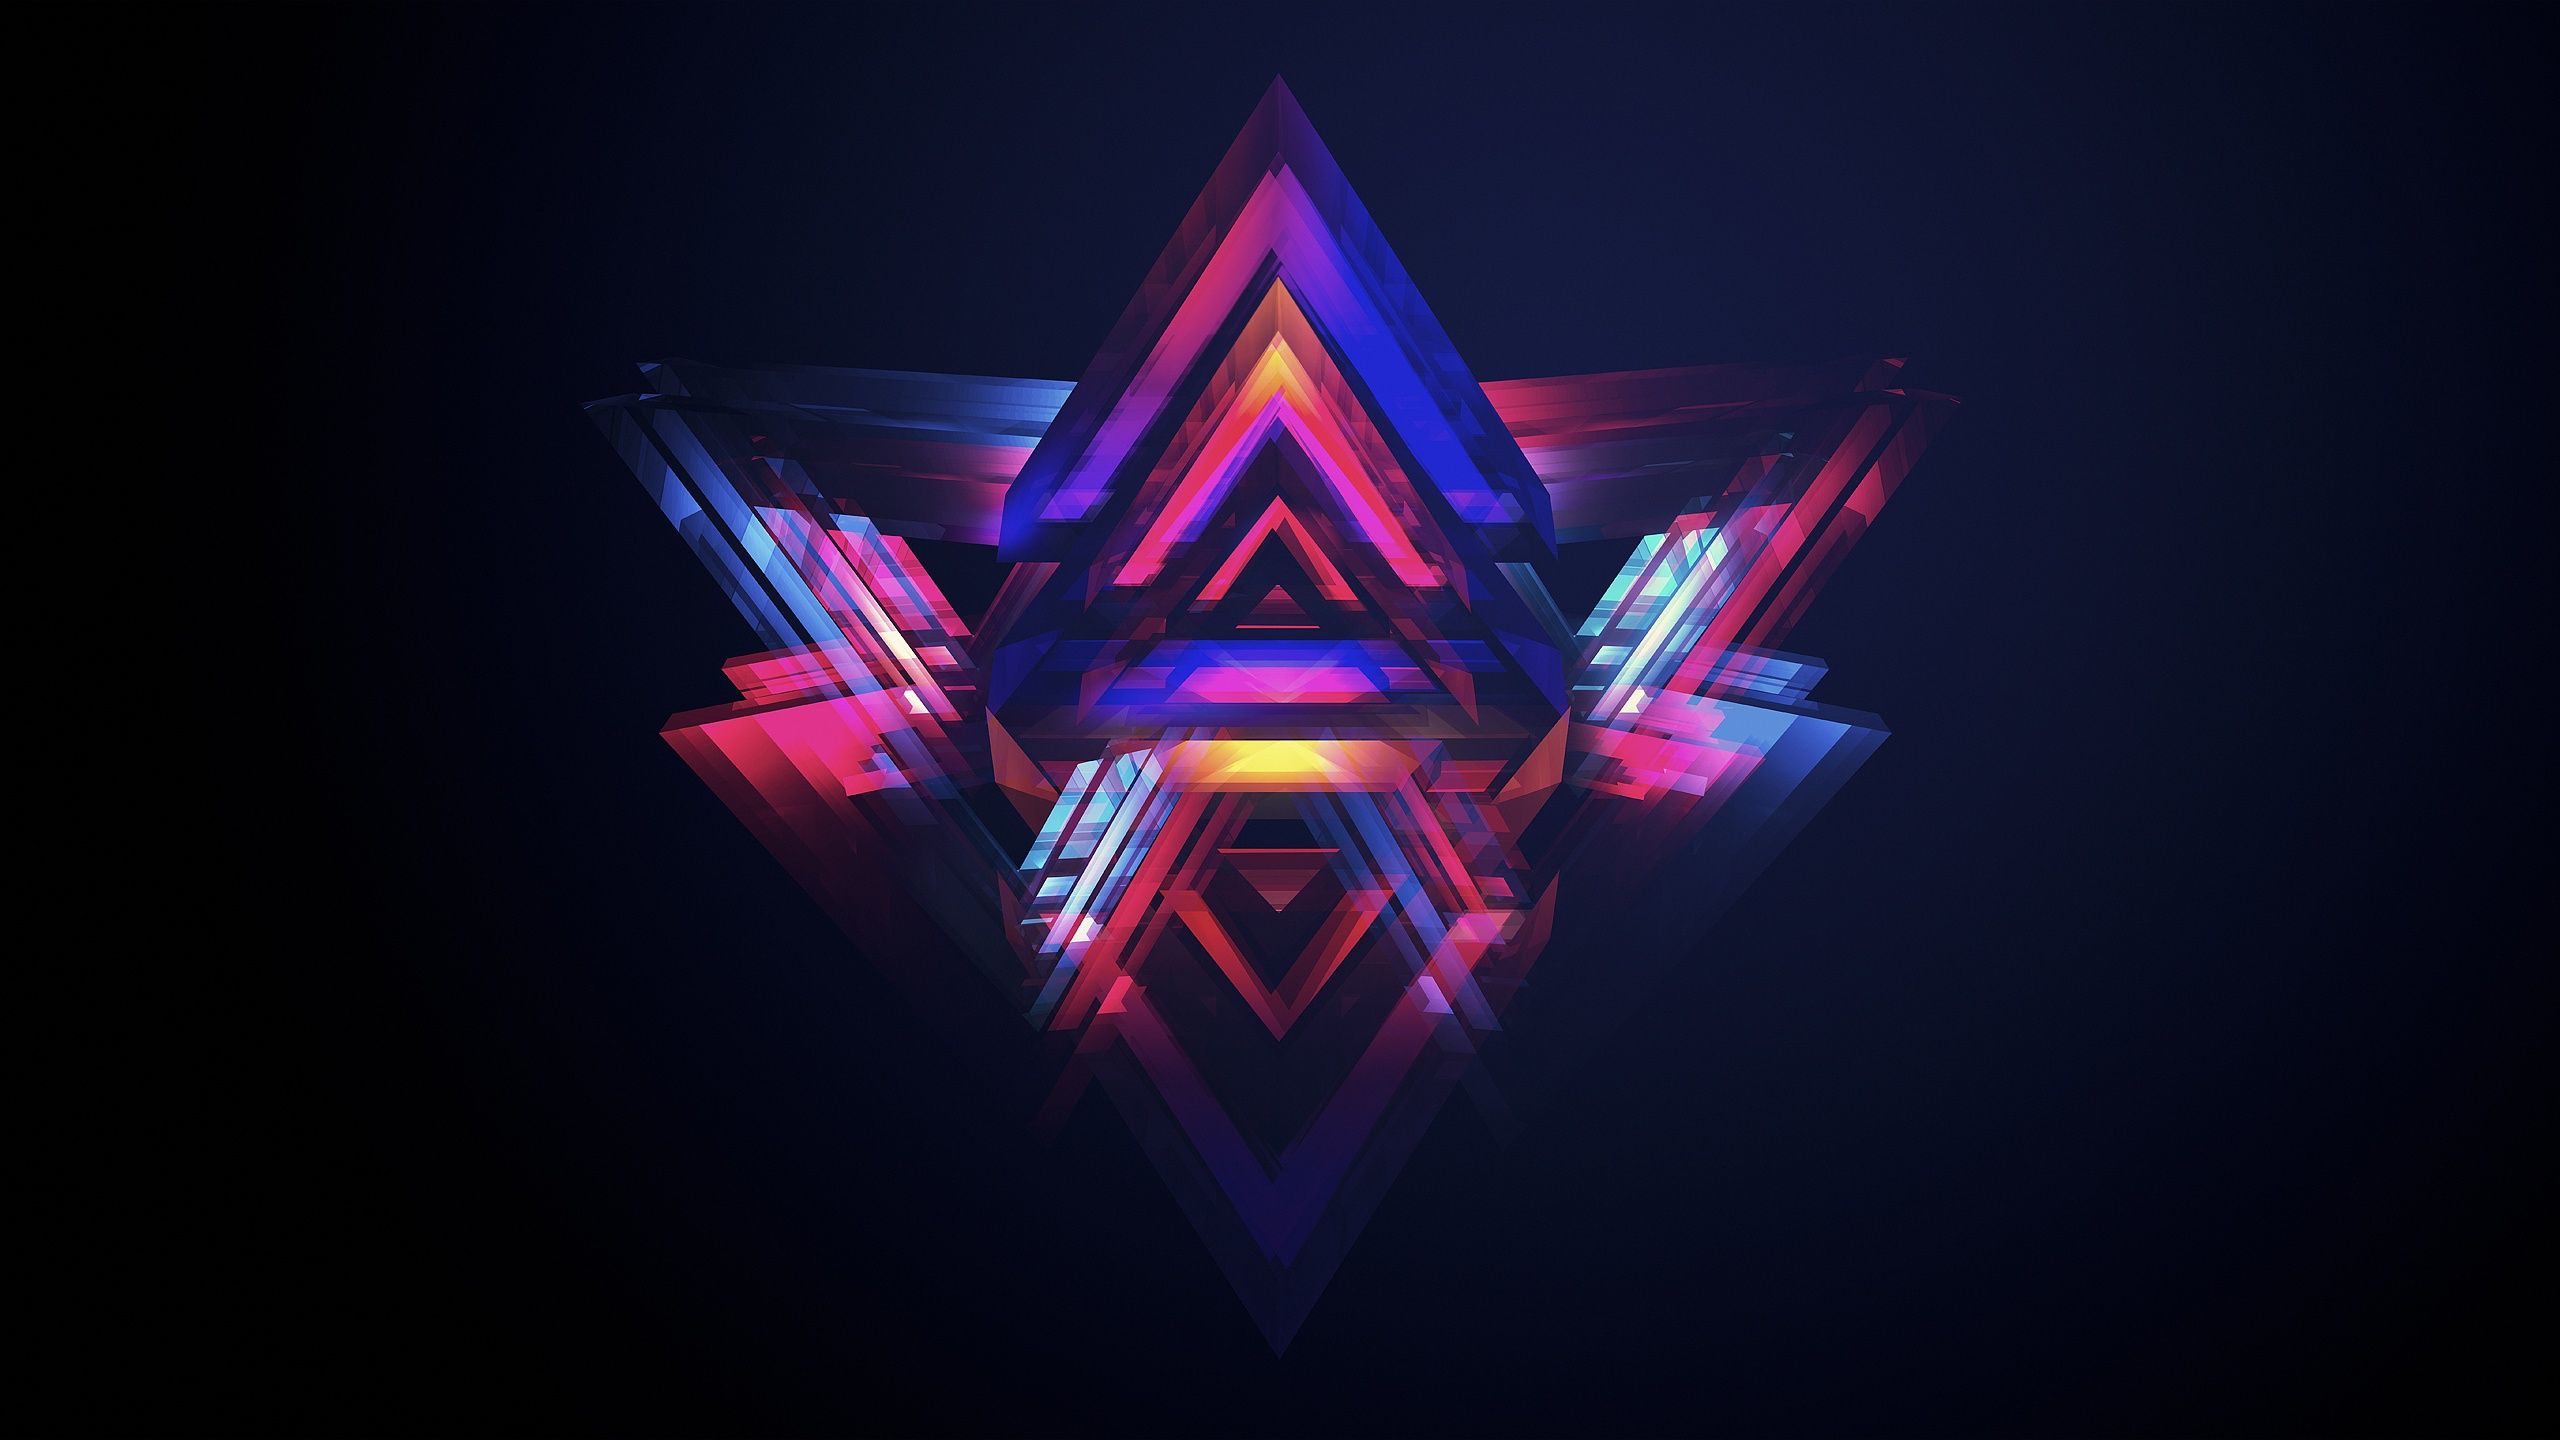 Colorful Star Abstract Wallpapers #4238788, 2560x1440 | All For ...